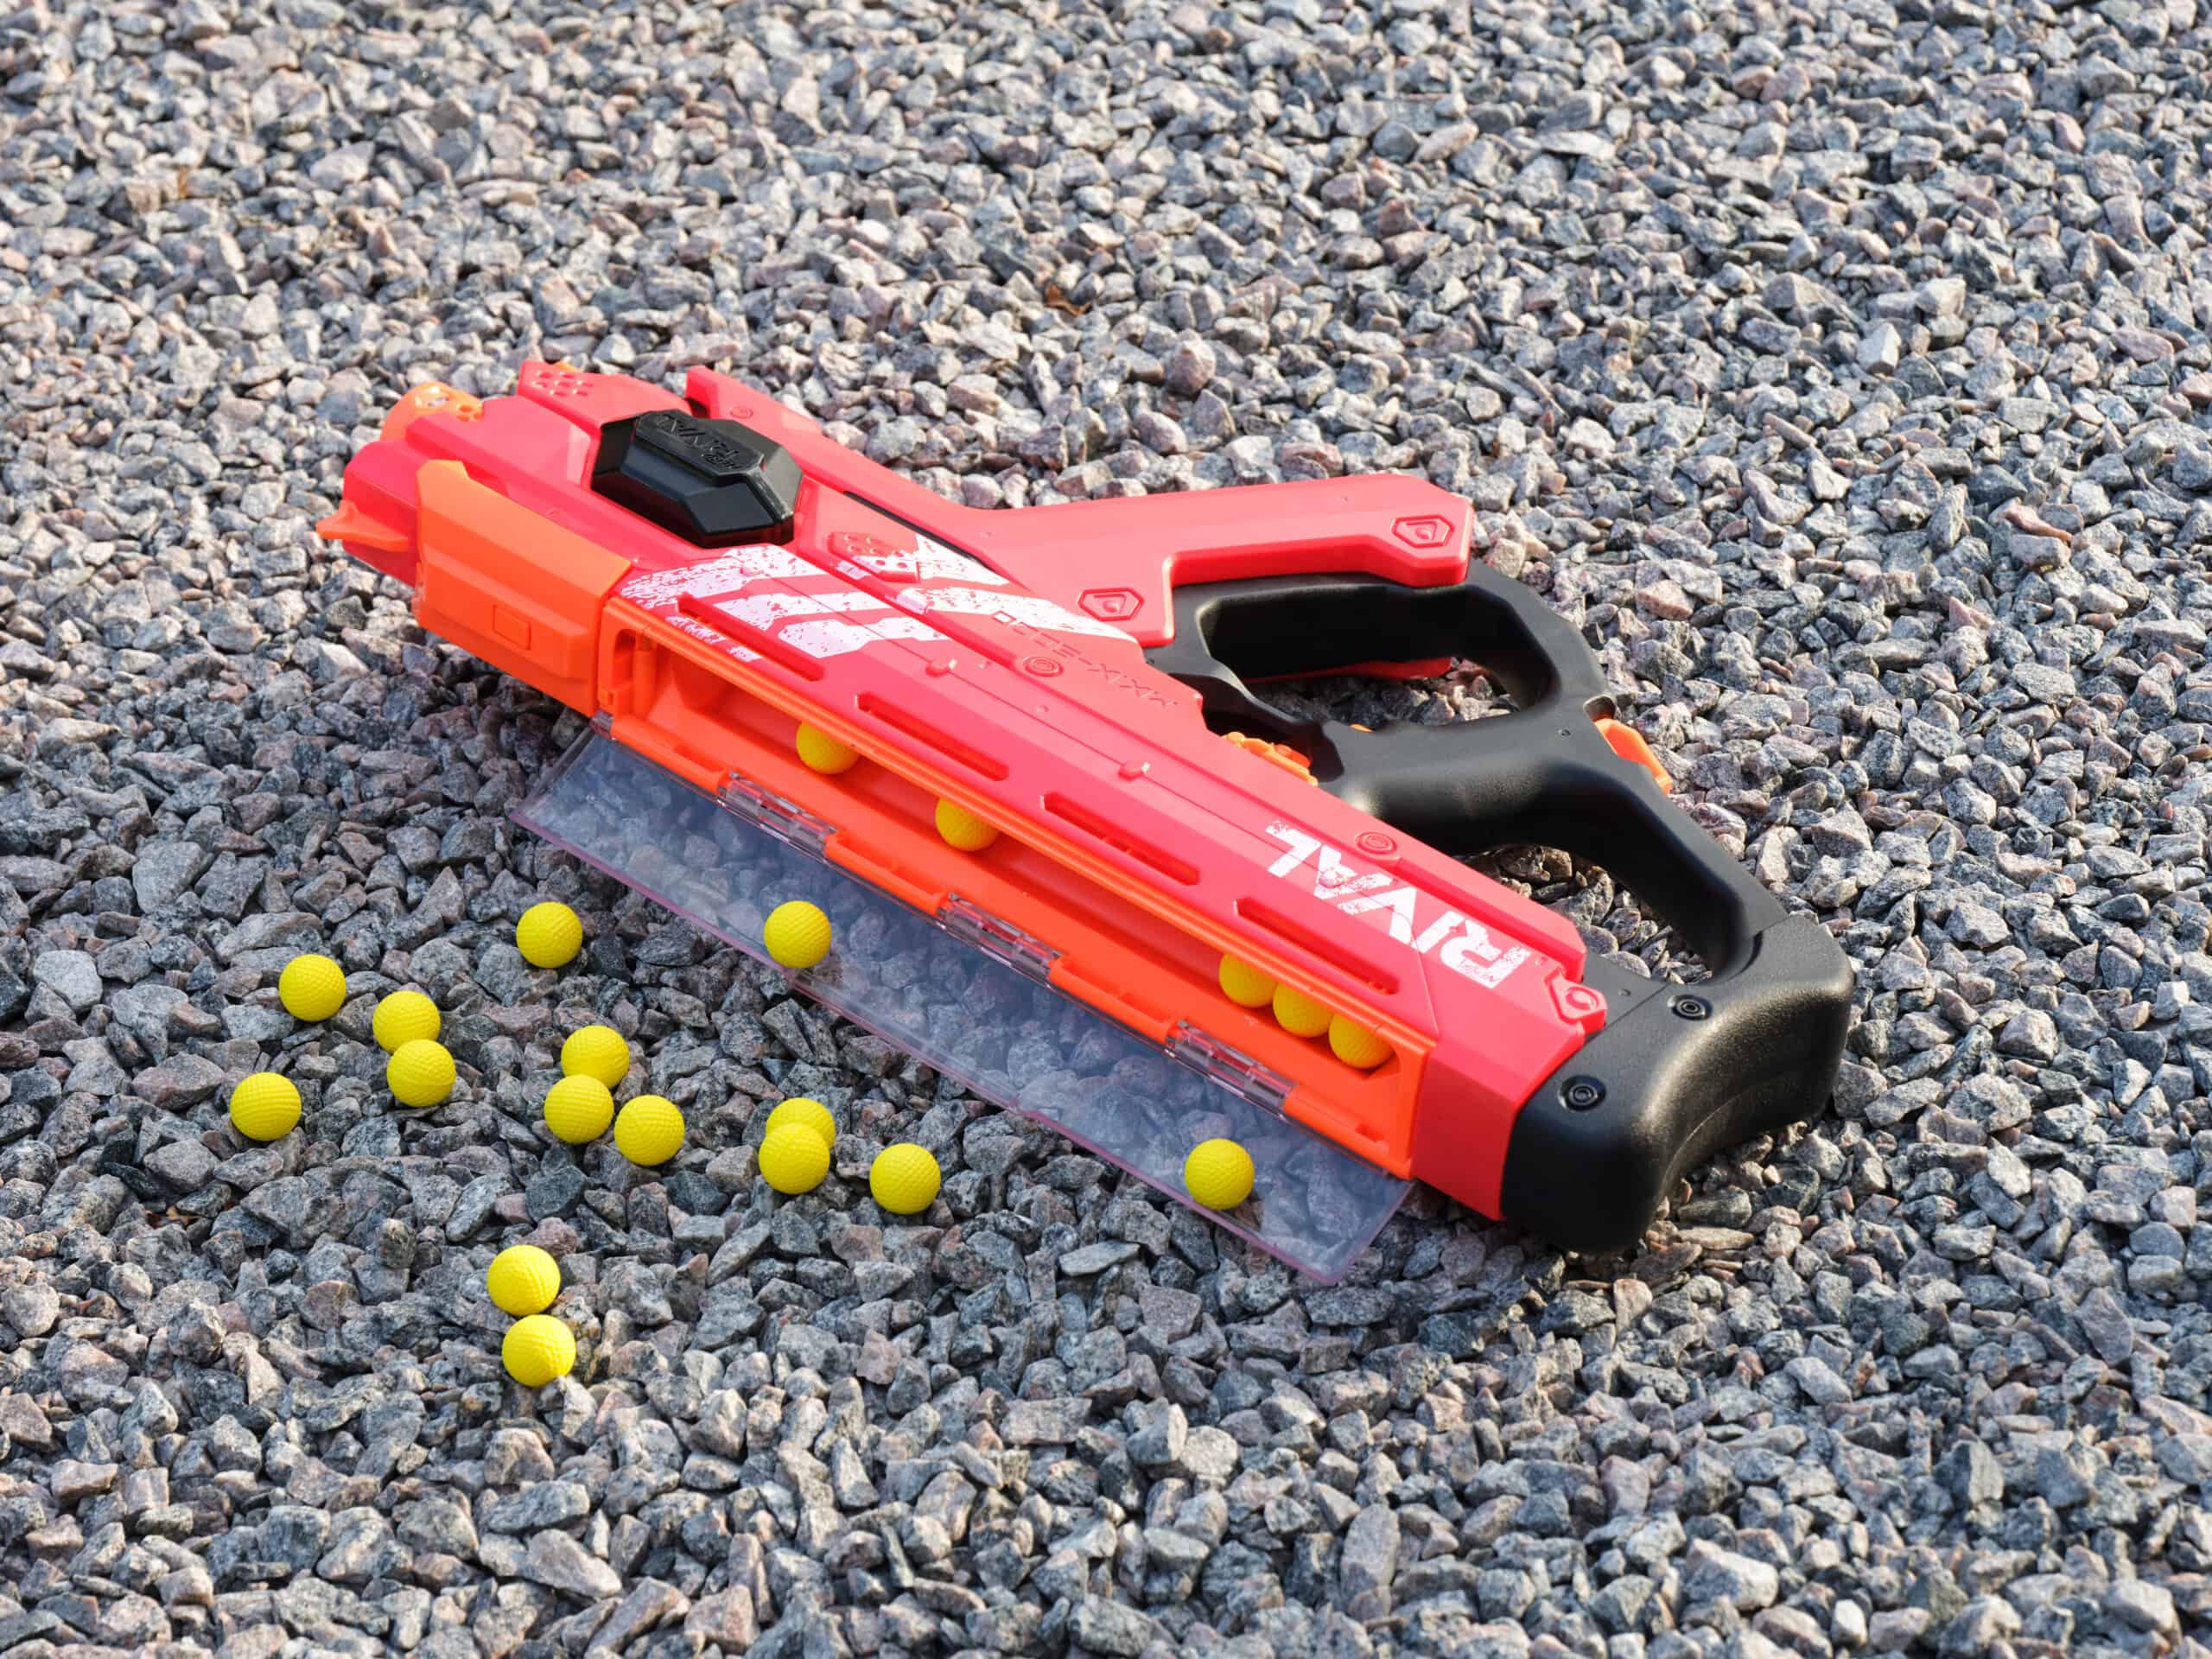 Nerf Rival vs Nerf Ultra: Which One Wins? - History-Computer